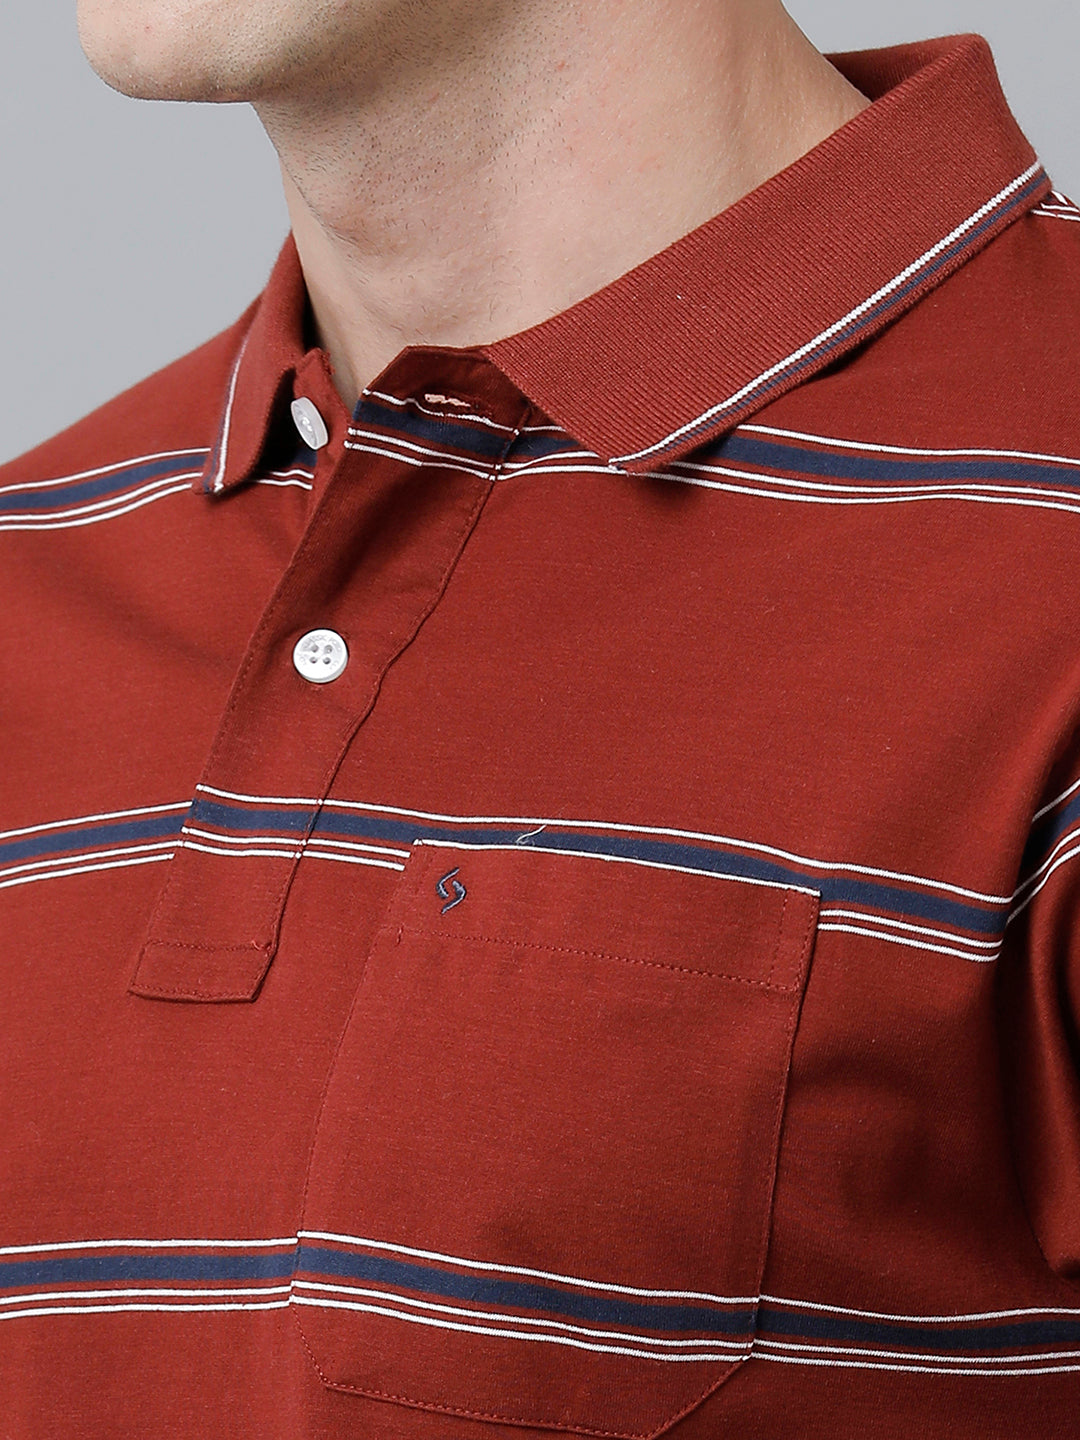 Classic Polo Men's Cotton Half Sleeve Striped Authentic Fit Polo Neck Red Color T-Shirt | Ap - 90 A